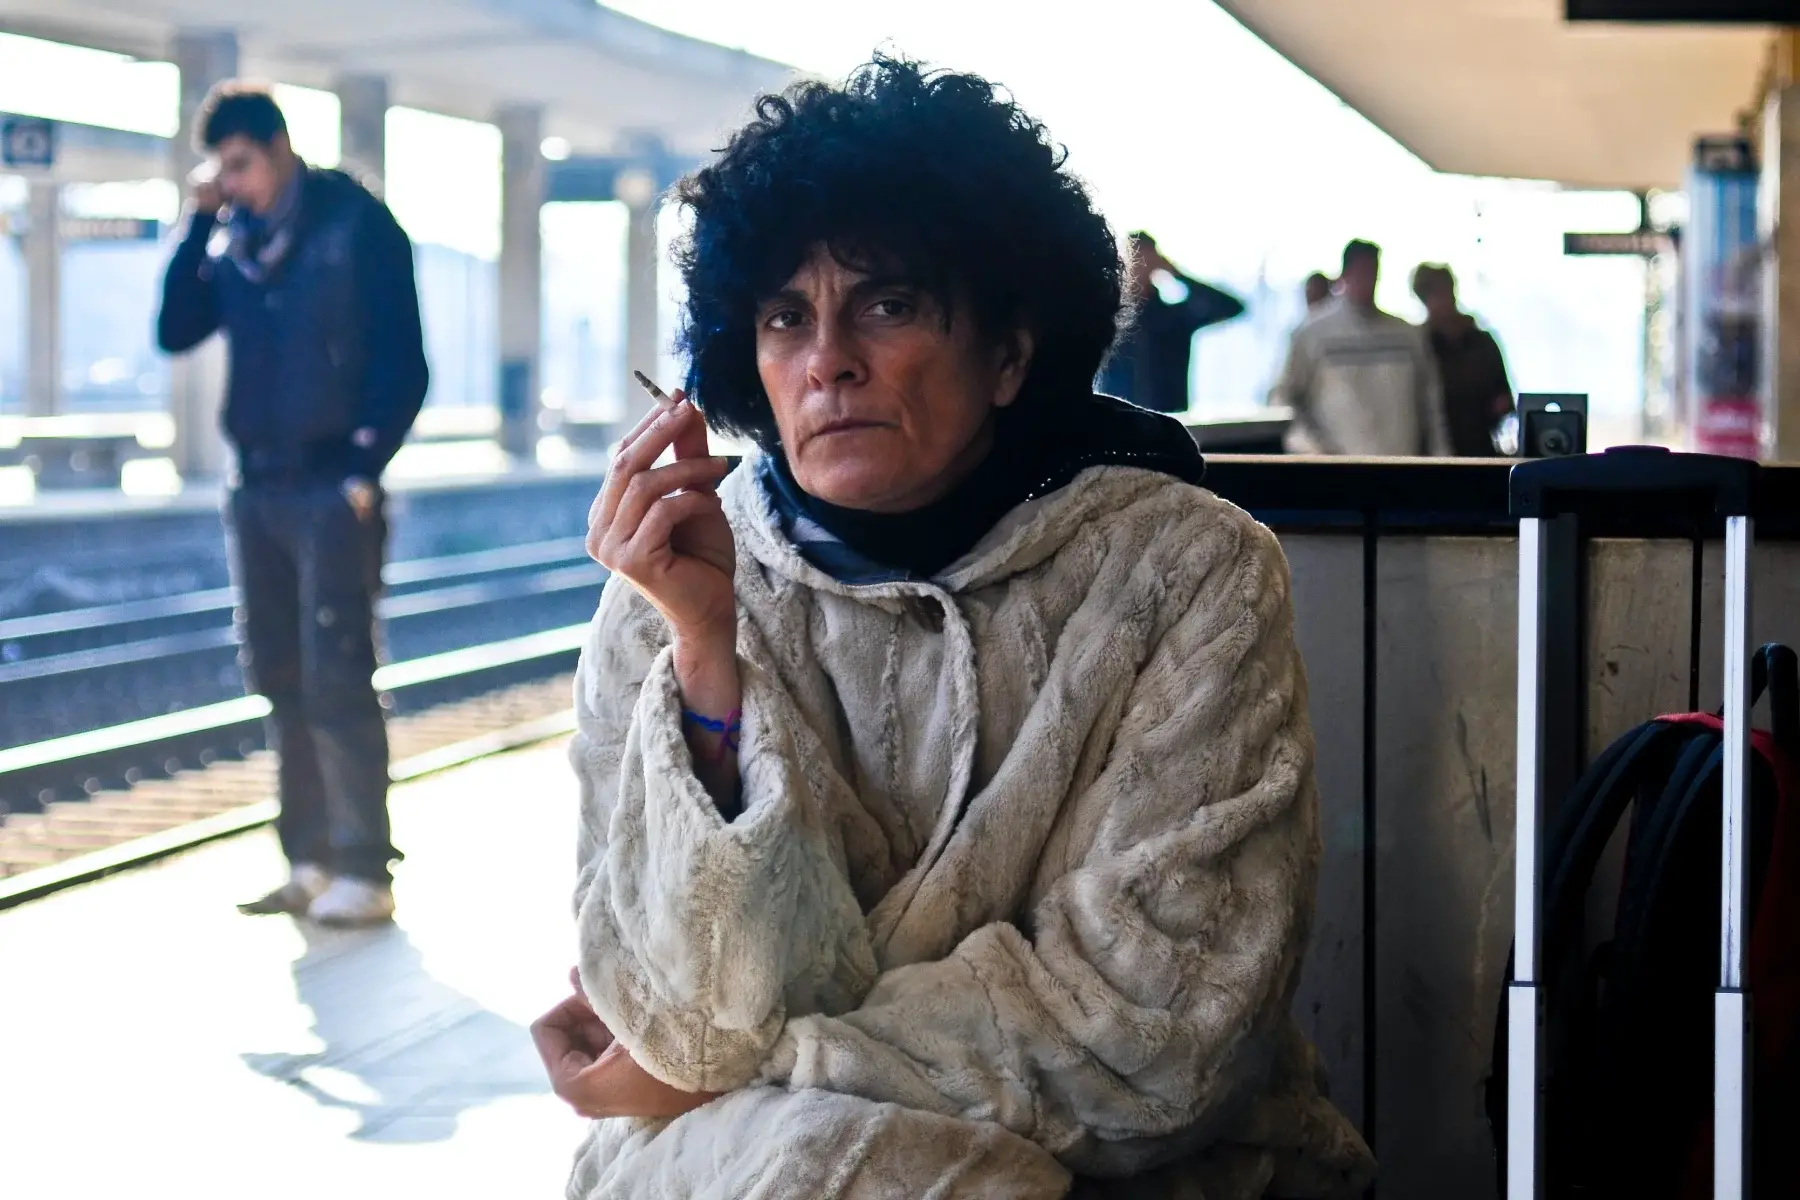 Angry woman smoking a cigarette at an Italian train station